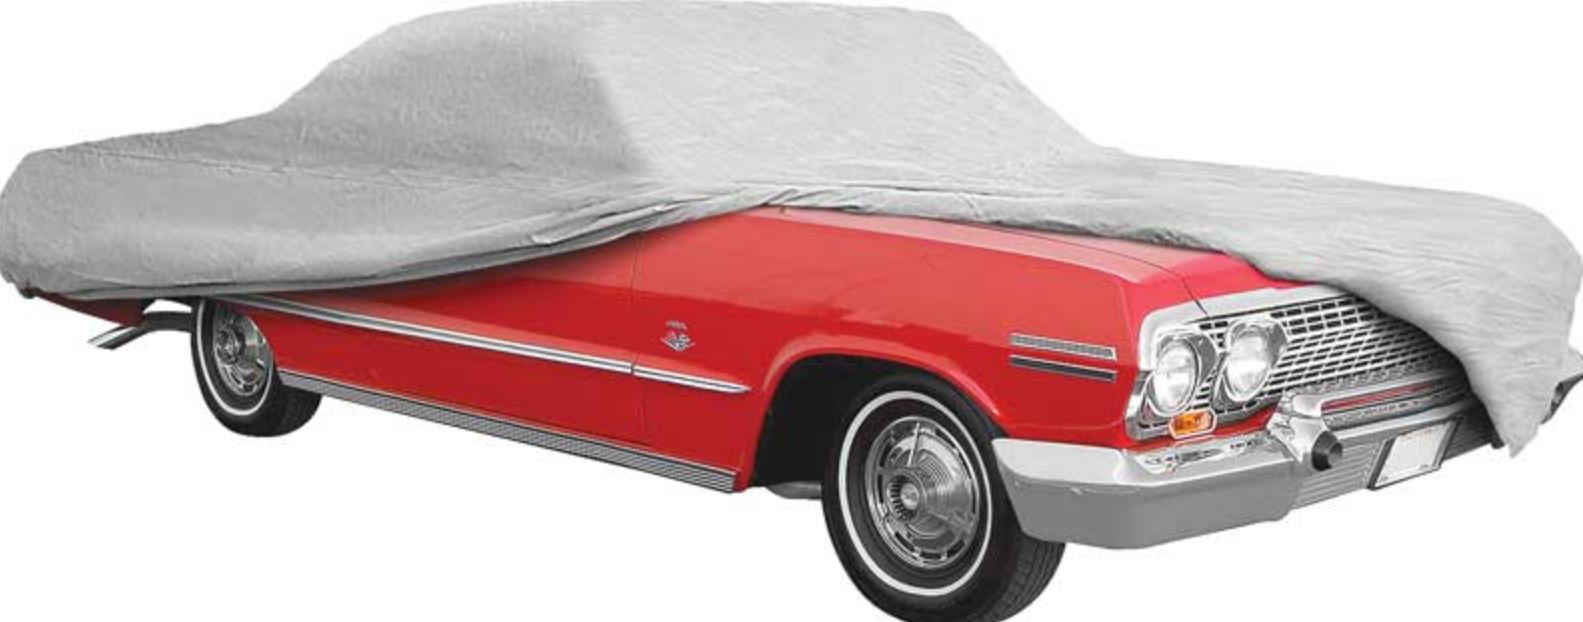 1965-76 Impala / Full Size2 Or Door (Except Fastback) GrayWeather Blocker Plus Car Cover 